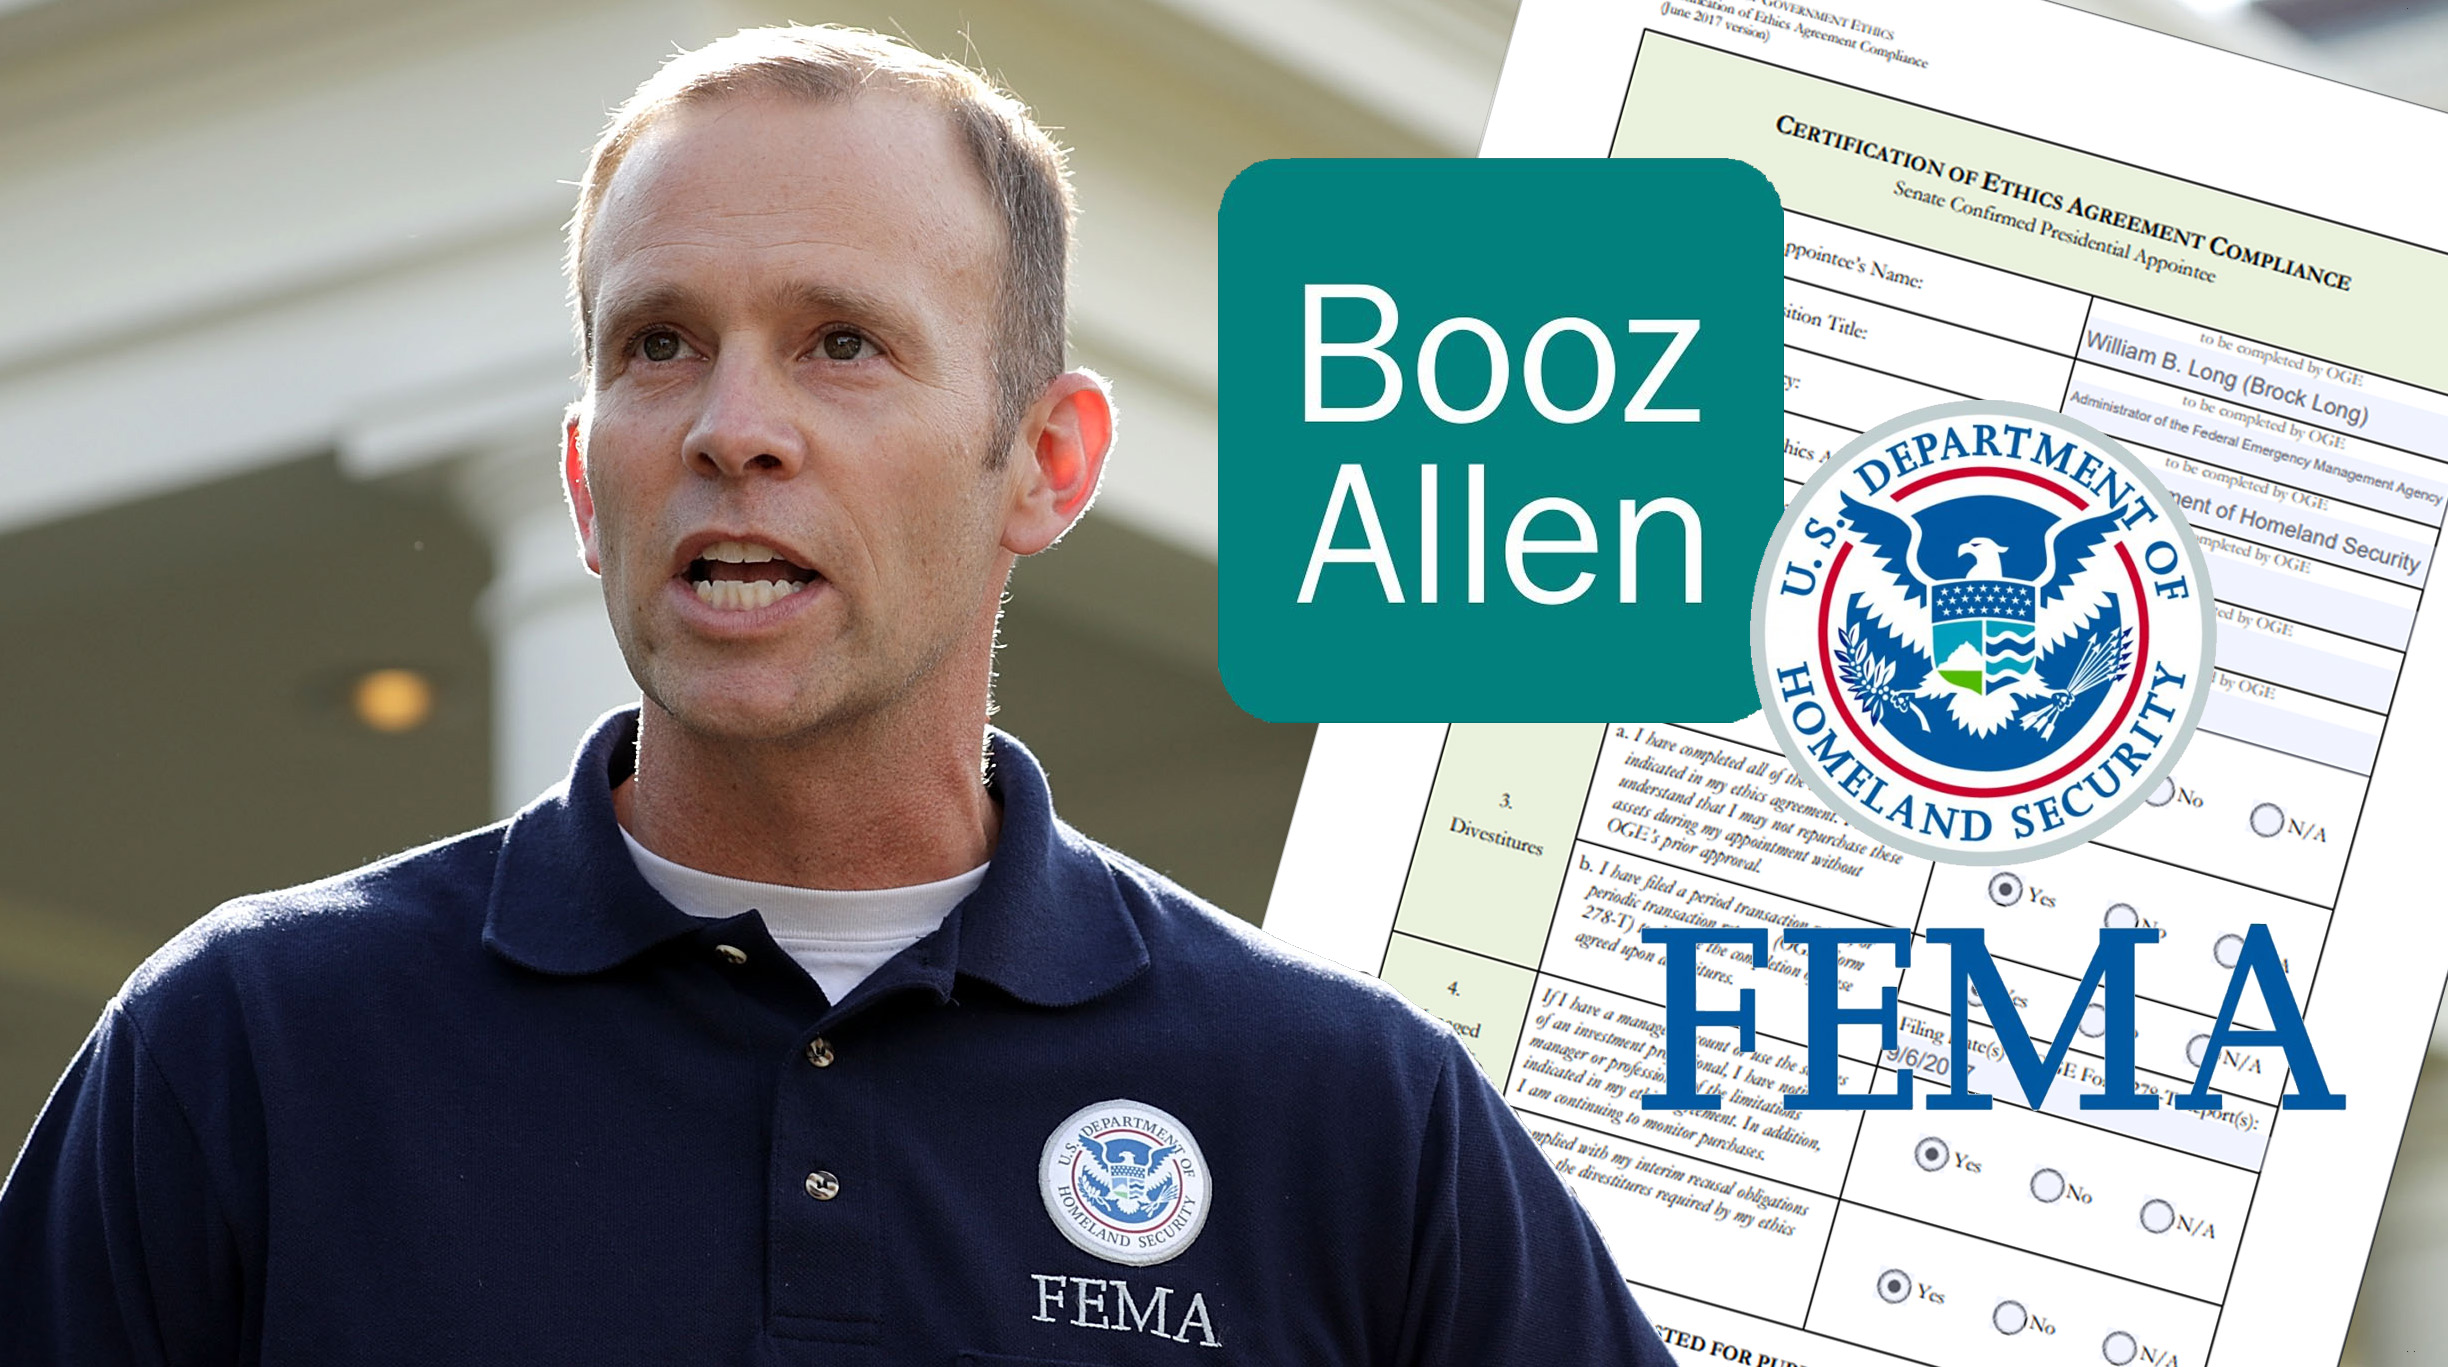 FEMA Awards Contracts to FEMA Chief’s Former Clients